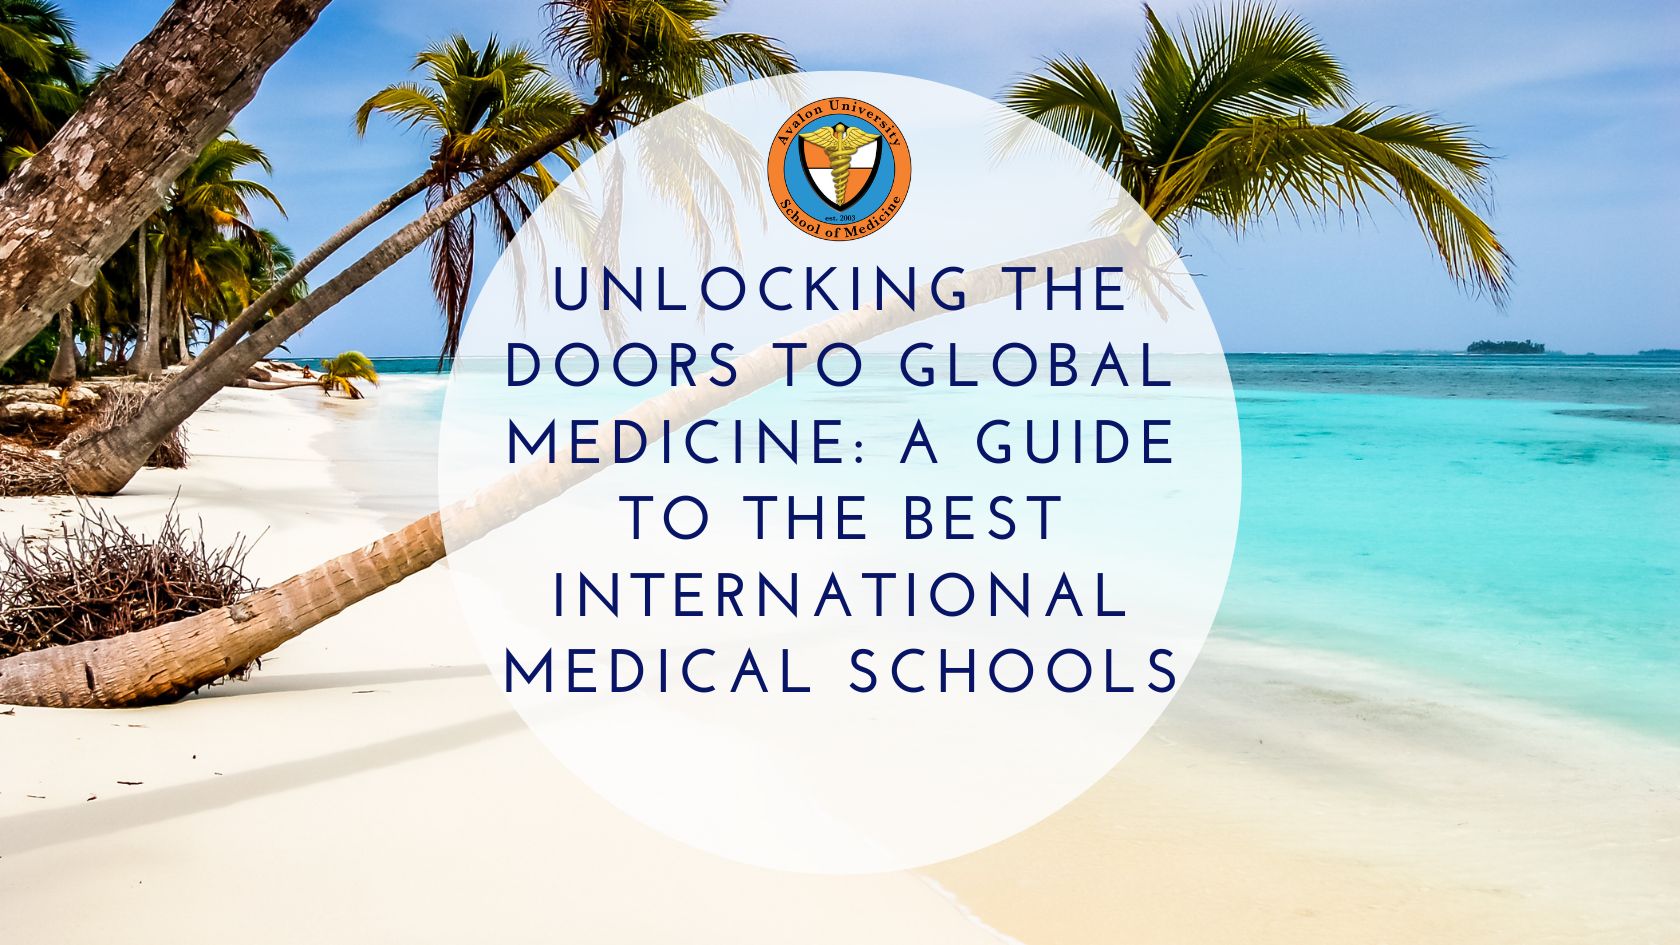 A Guide to the Best International Medical Schools